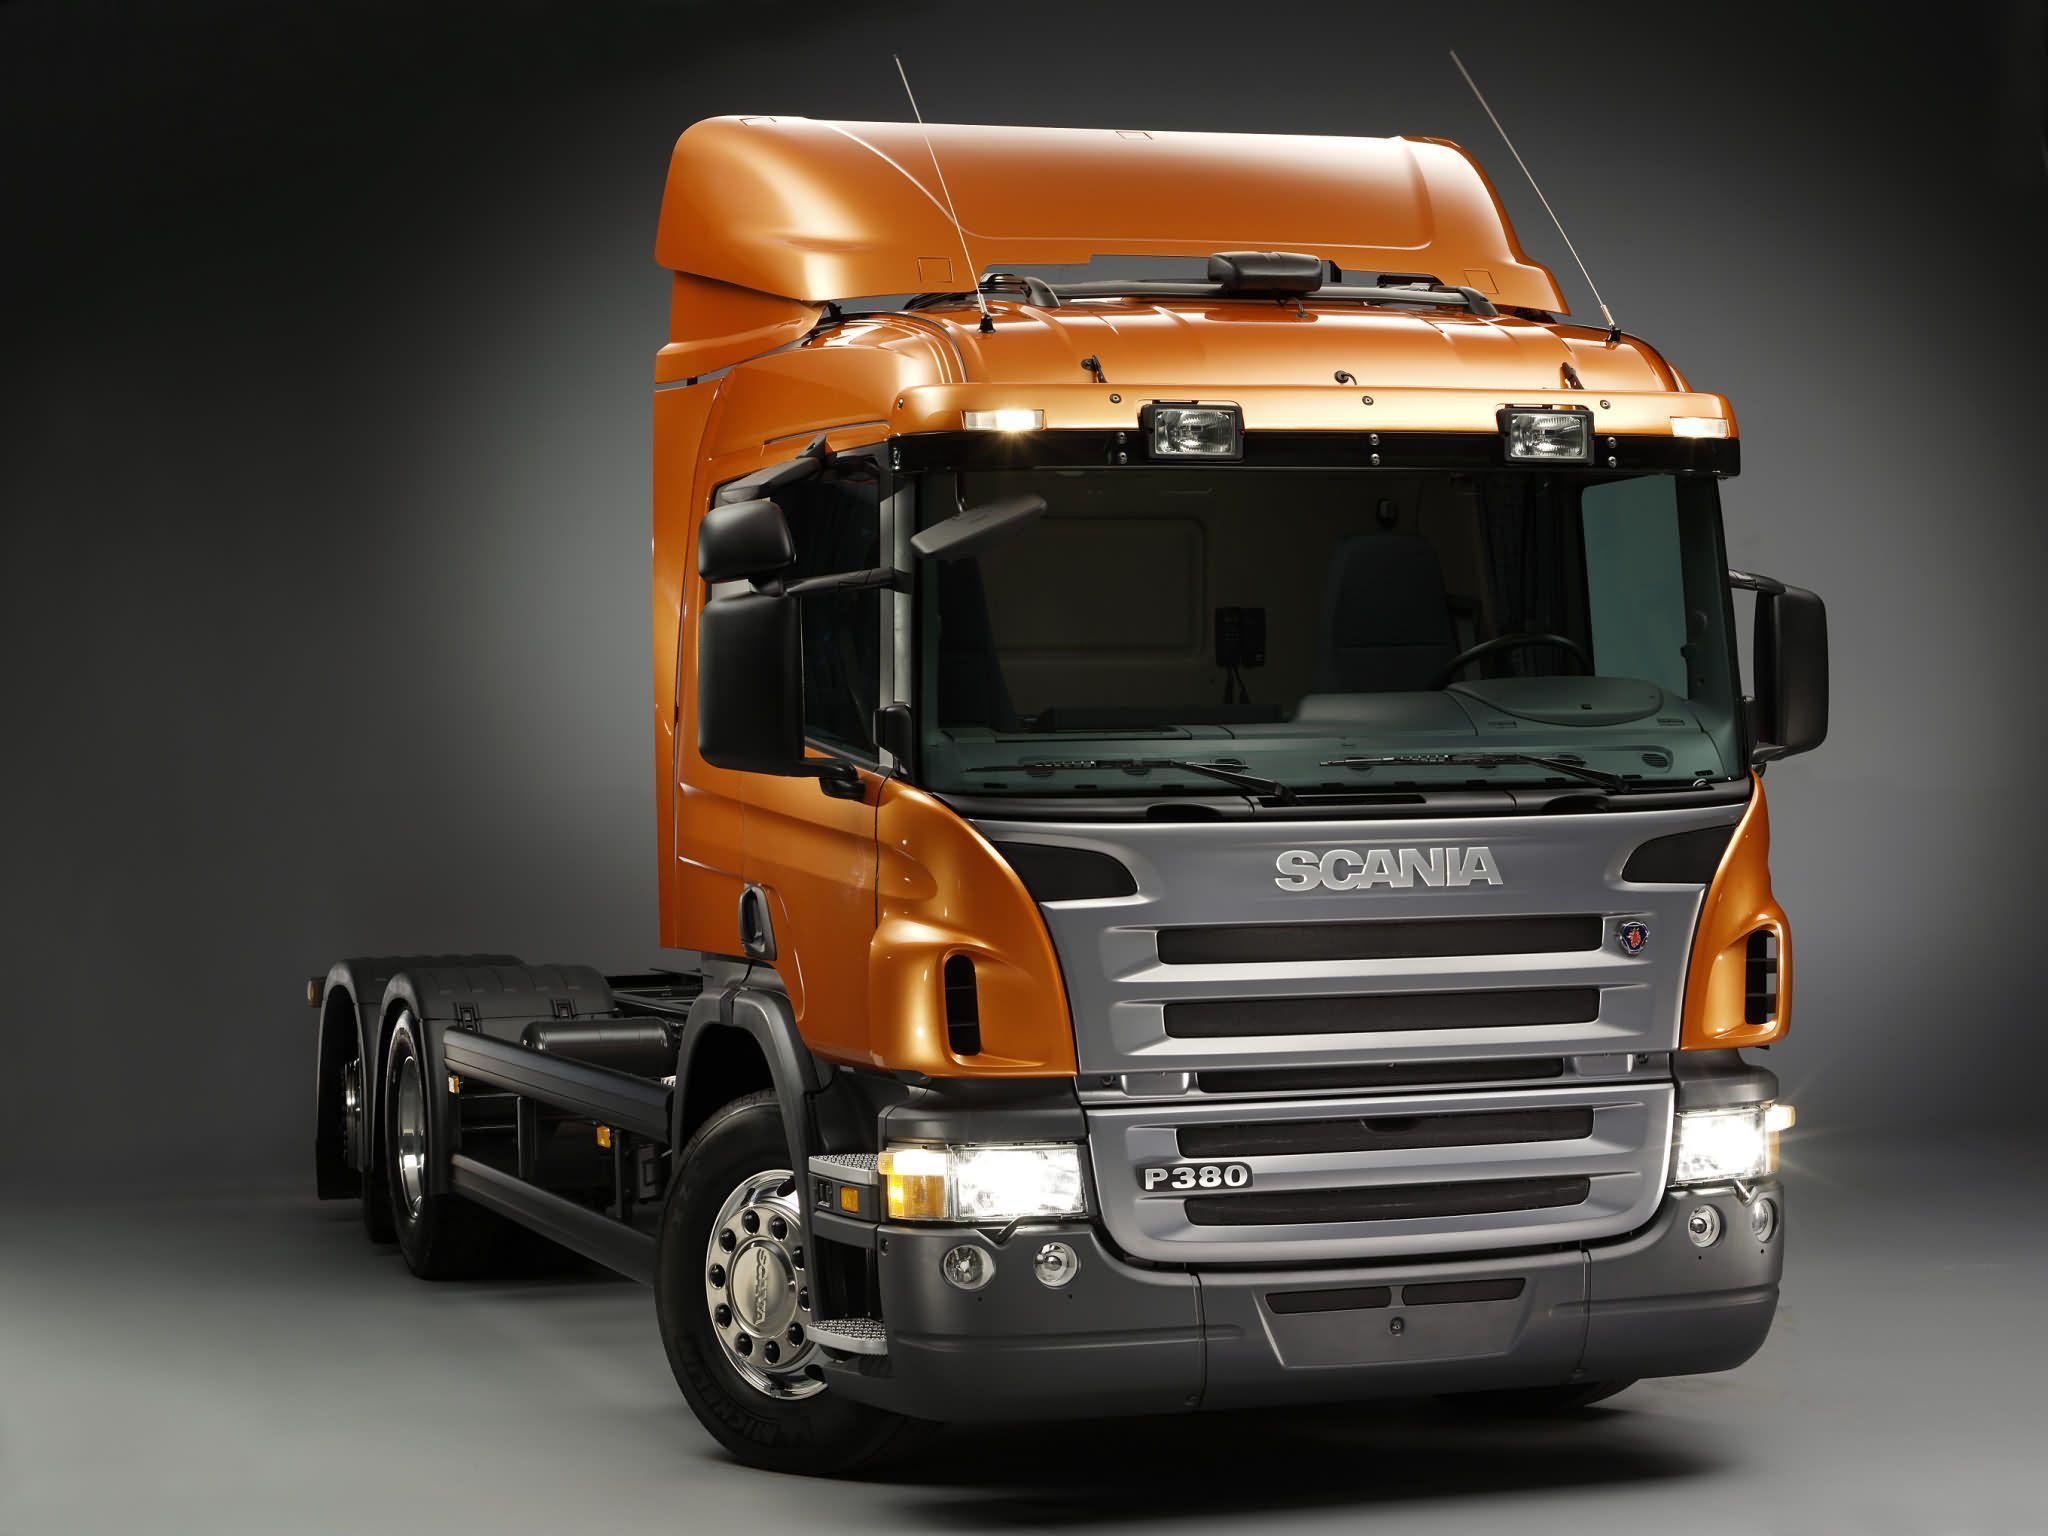 Scania Trucks Wallpaper Free Image For Commercial Use